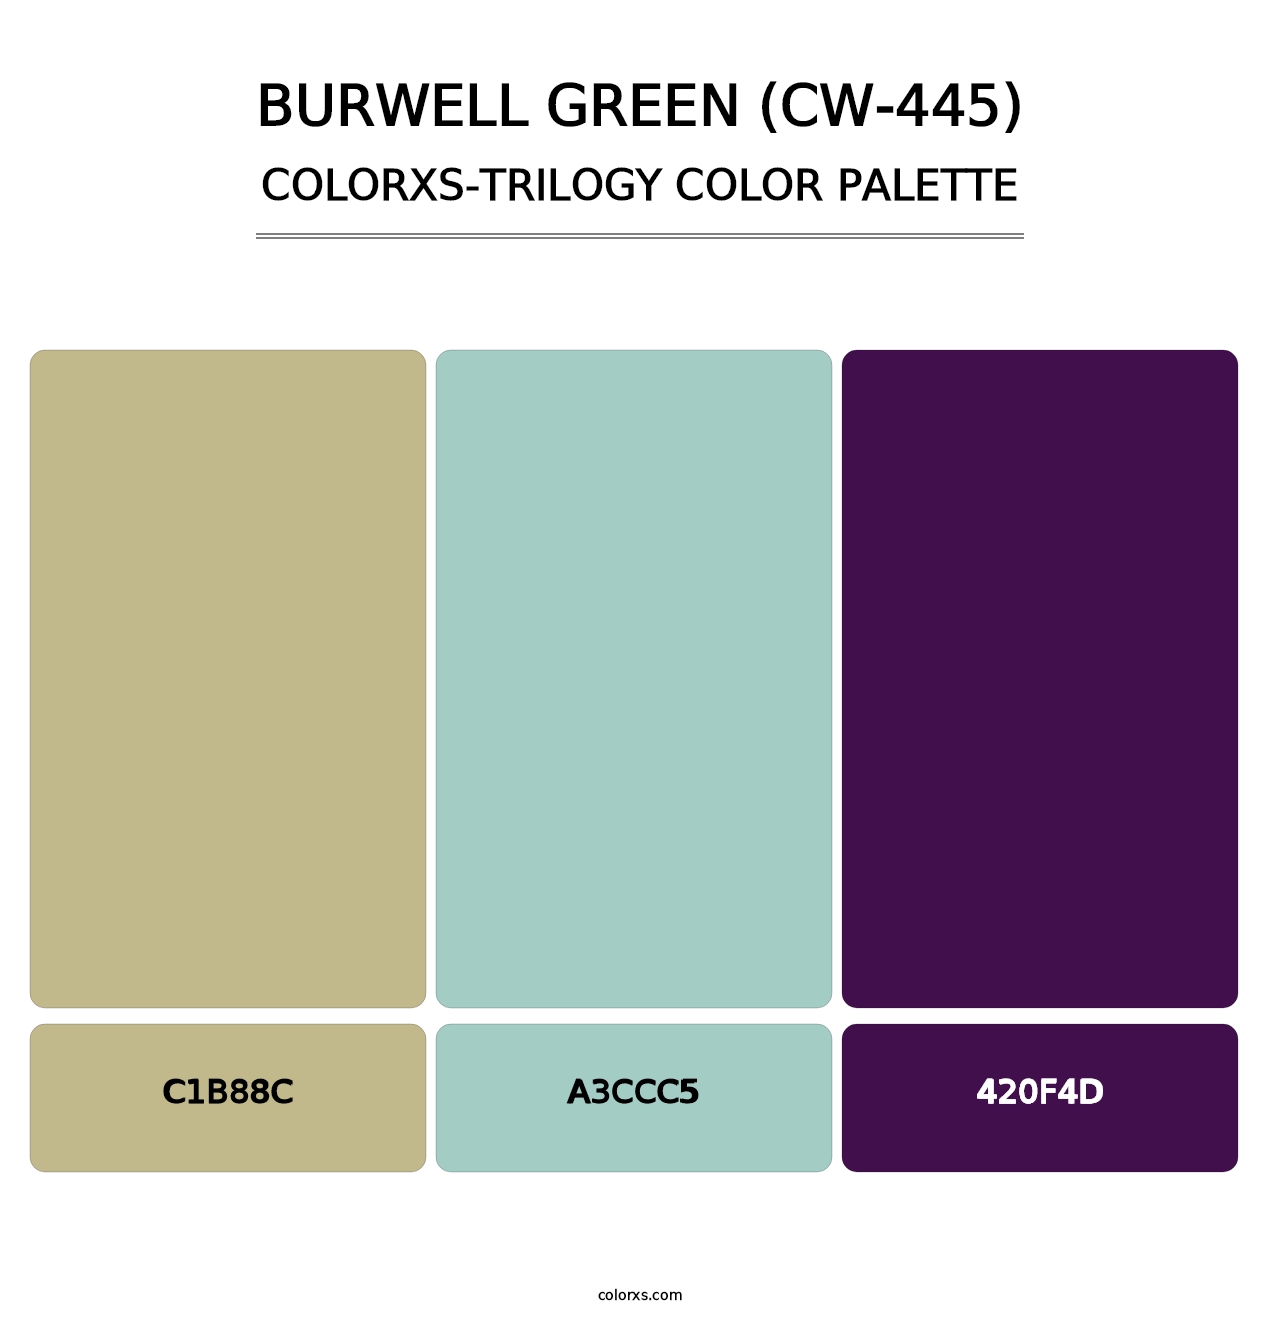 Burwell Green (CW-445) - Colorxs Trilogy Palette